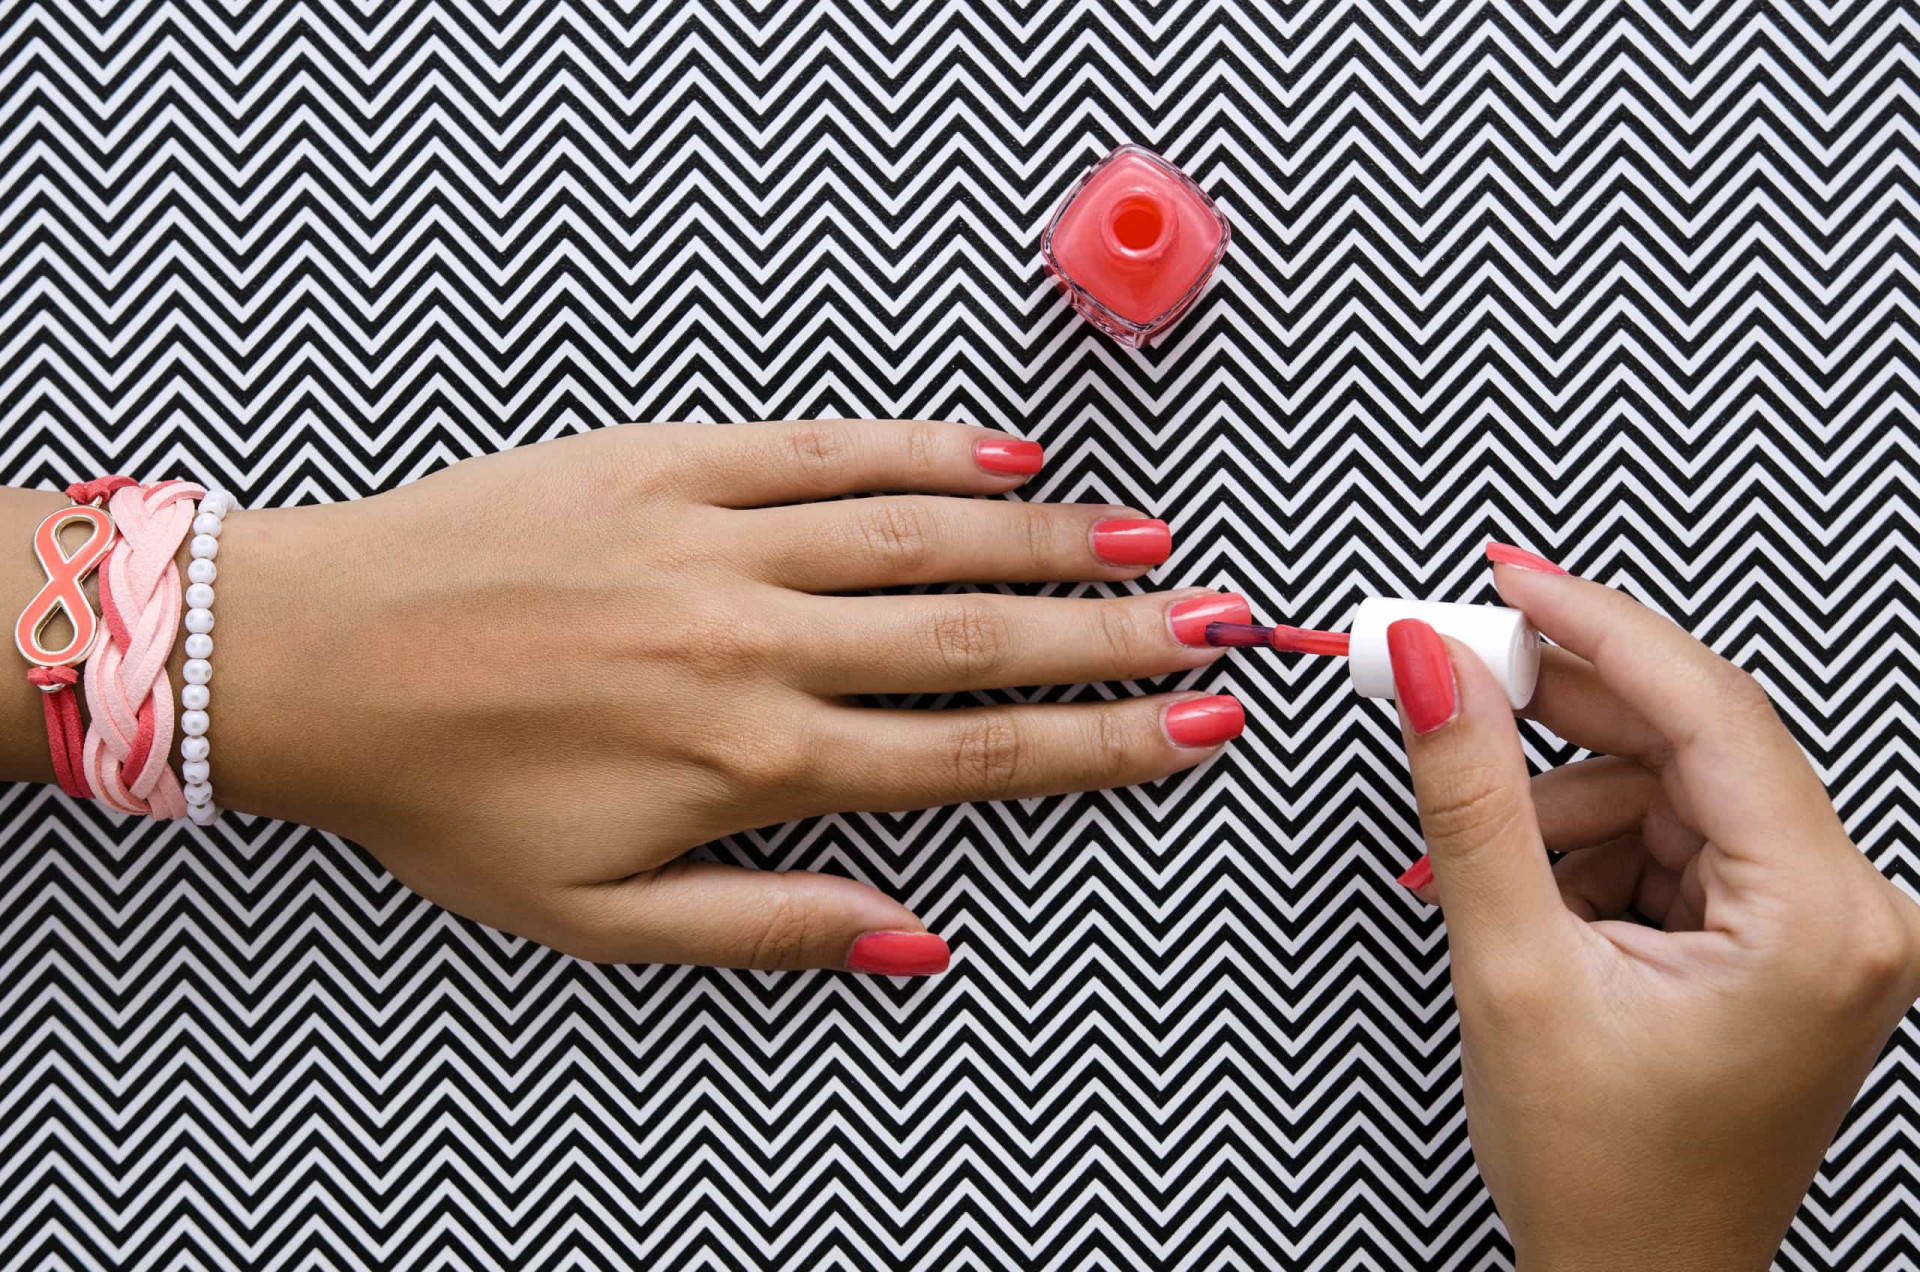 <p><span>In the final step, apply nail polish. The best manicures involve three stages of polish: base coat, color coat, and top coat. For maximum coverage, apply more than one color coat. </span></p>